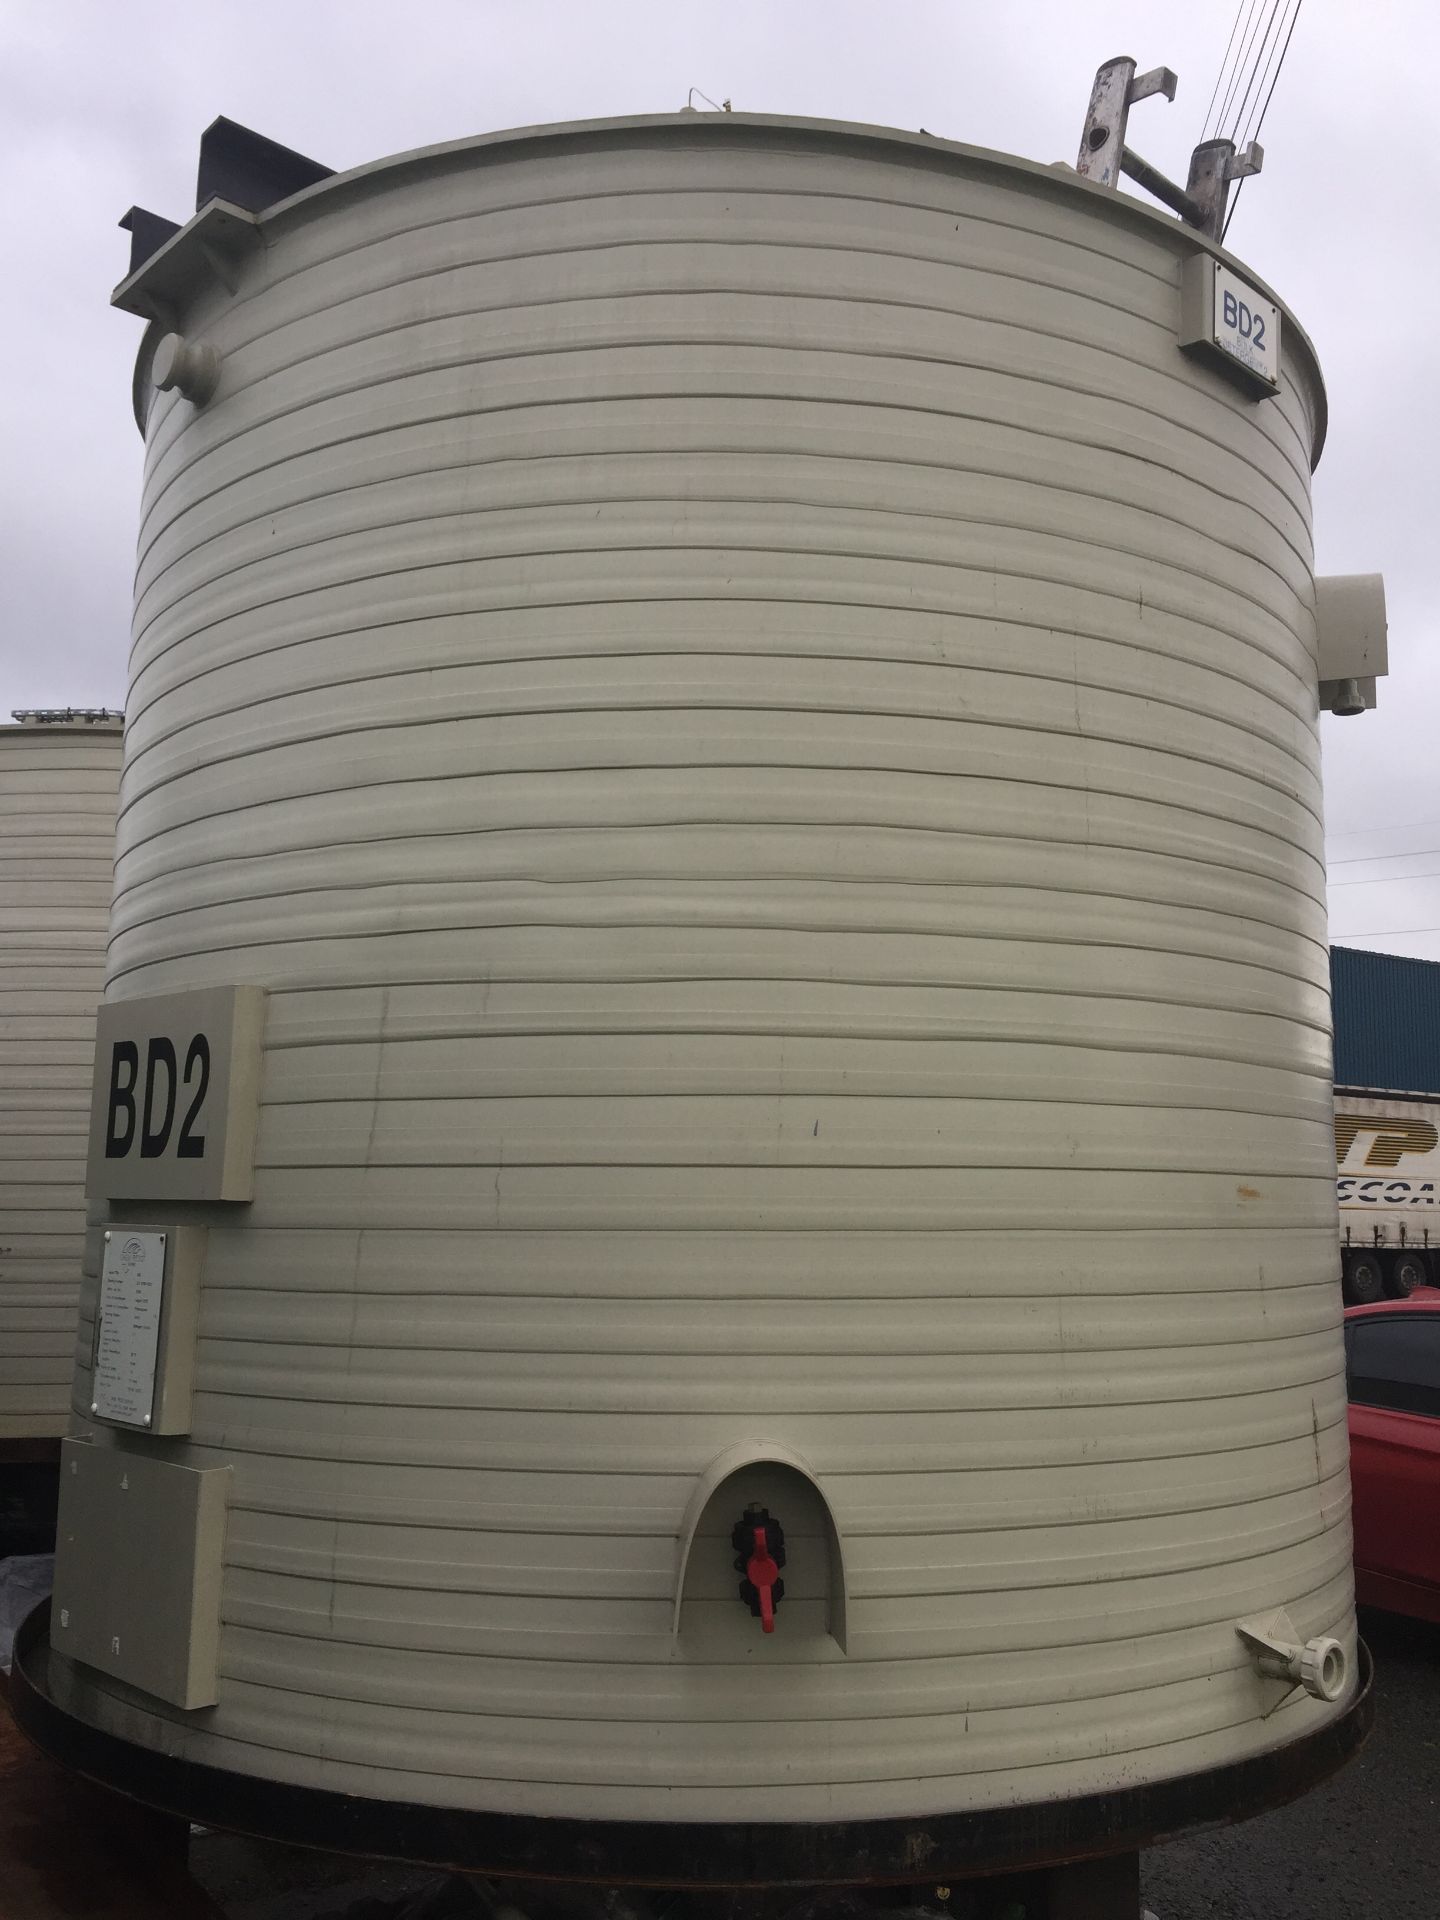 1 x BD2 12,000 Litre Polypropylene Chem Resist Tank - Location: Oldham Has been used for detergent - Image 2 of 7